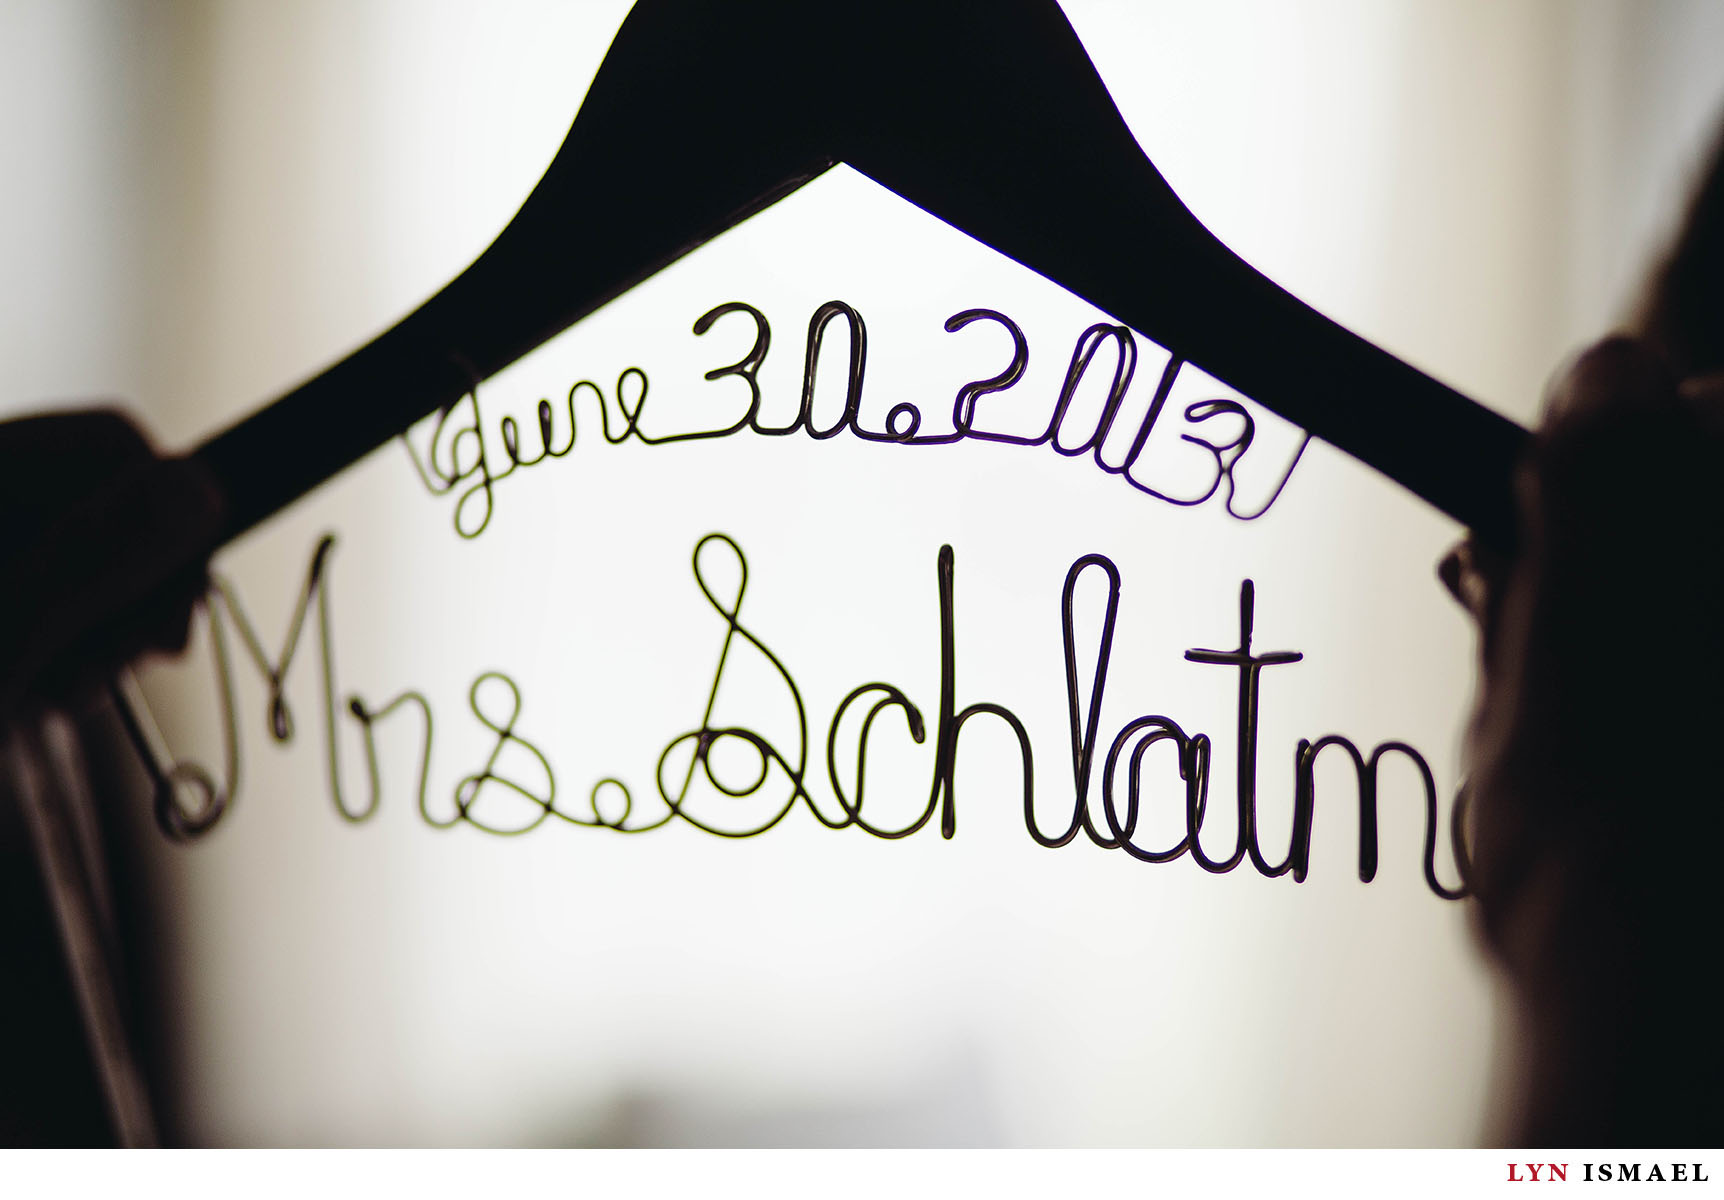 A detail of the wedding gown's hanger.